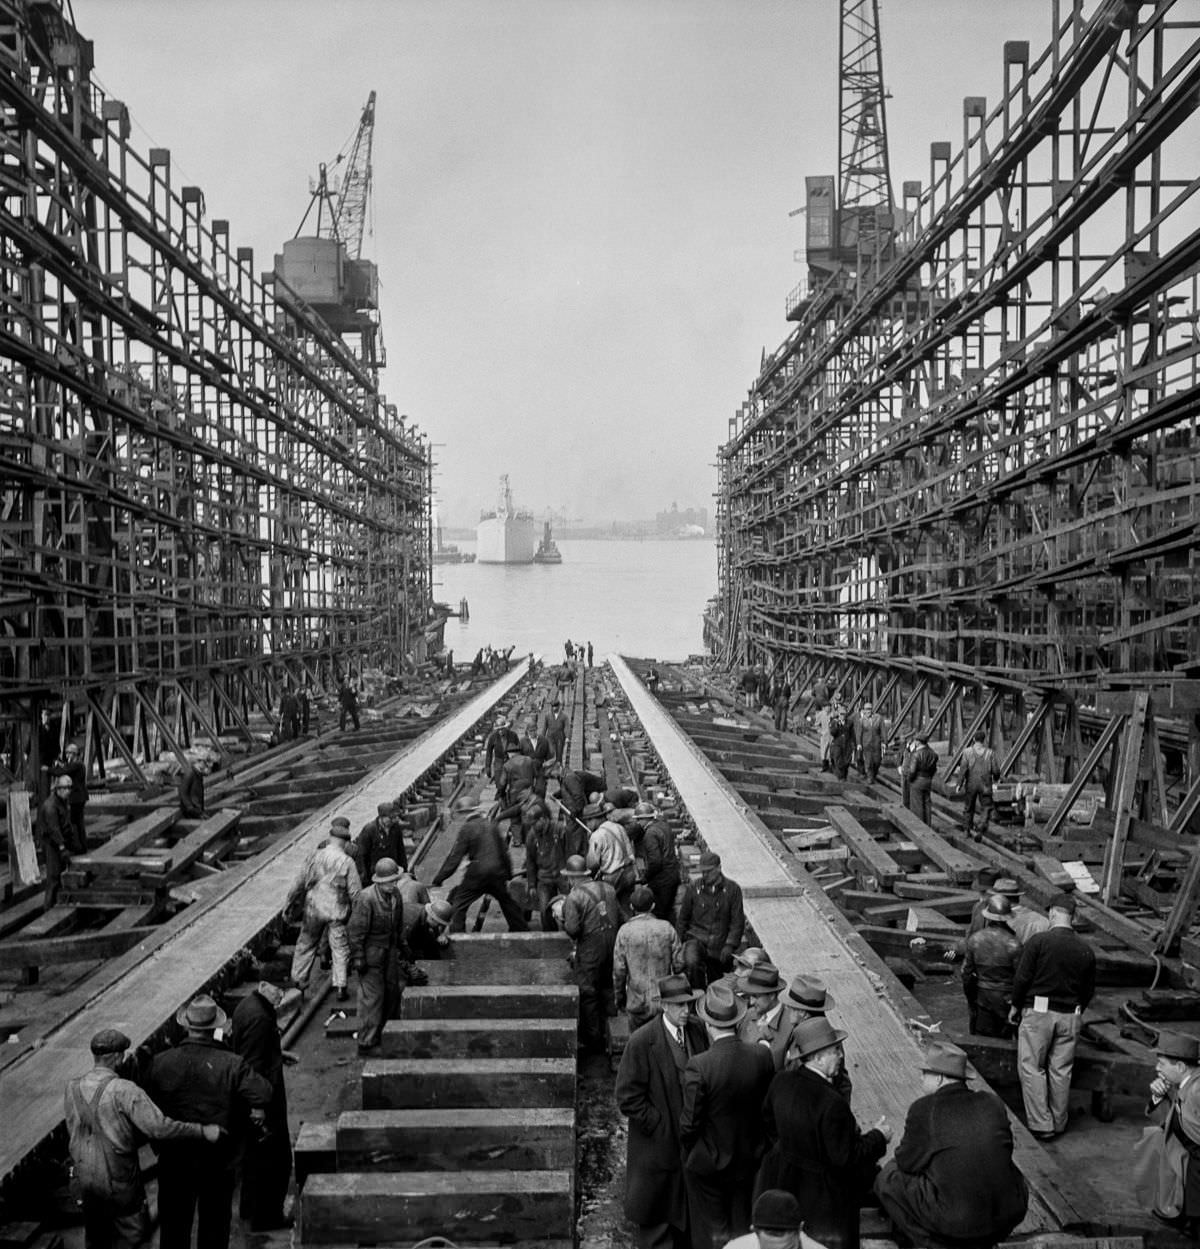 After a launch, workers fill the way and prepare to build another ship